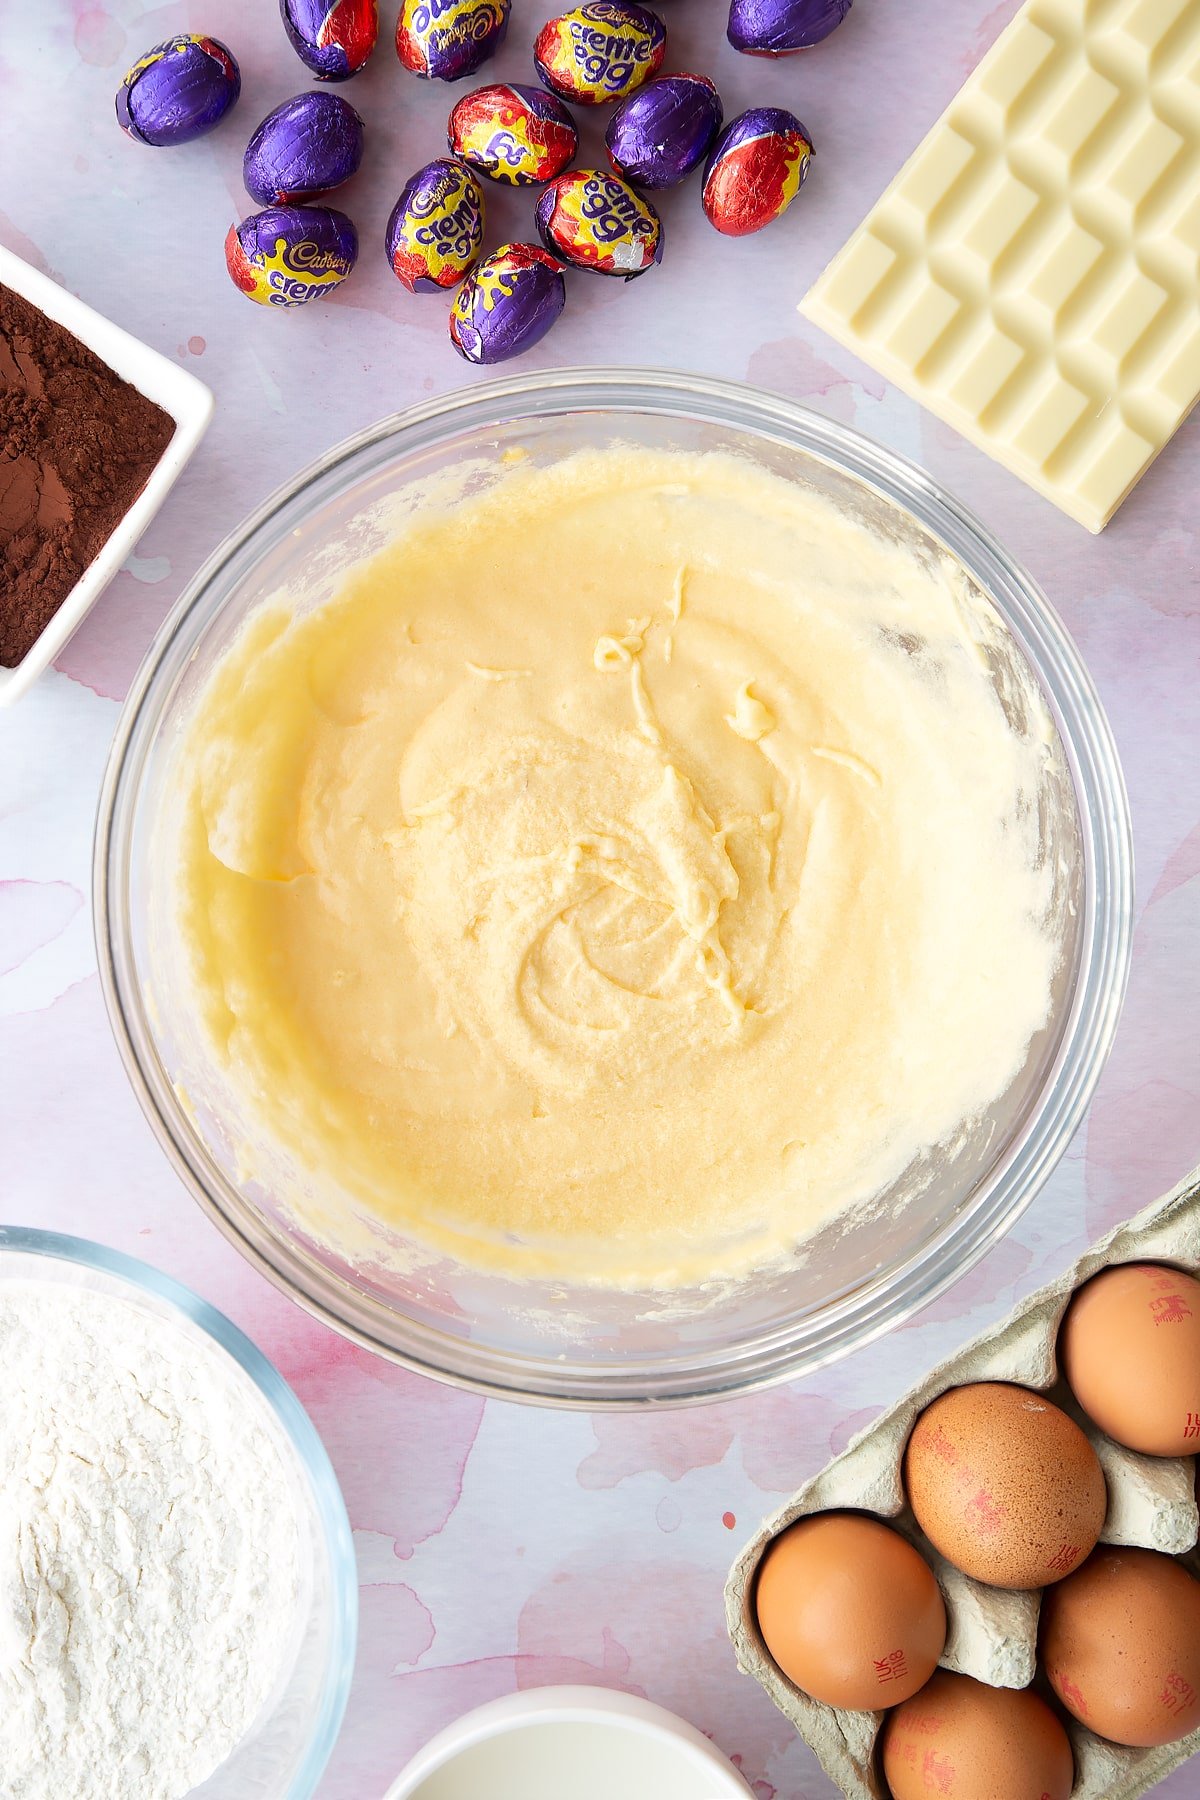 Butter, sugar and eggs beaten together. Ingredients to make Cadbury Creme Egg cakes surround the bowl.